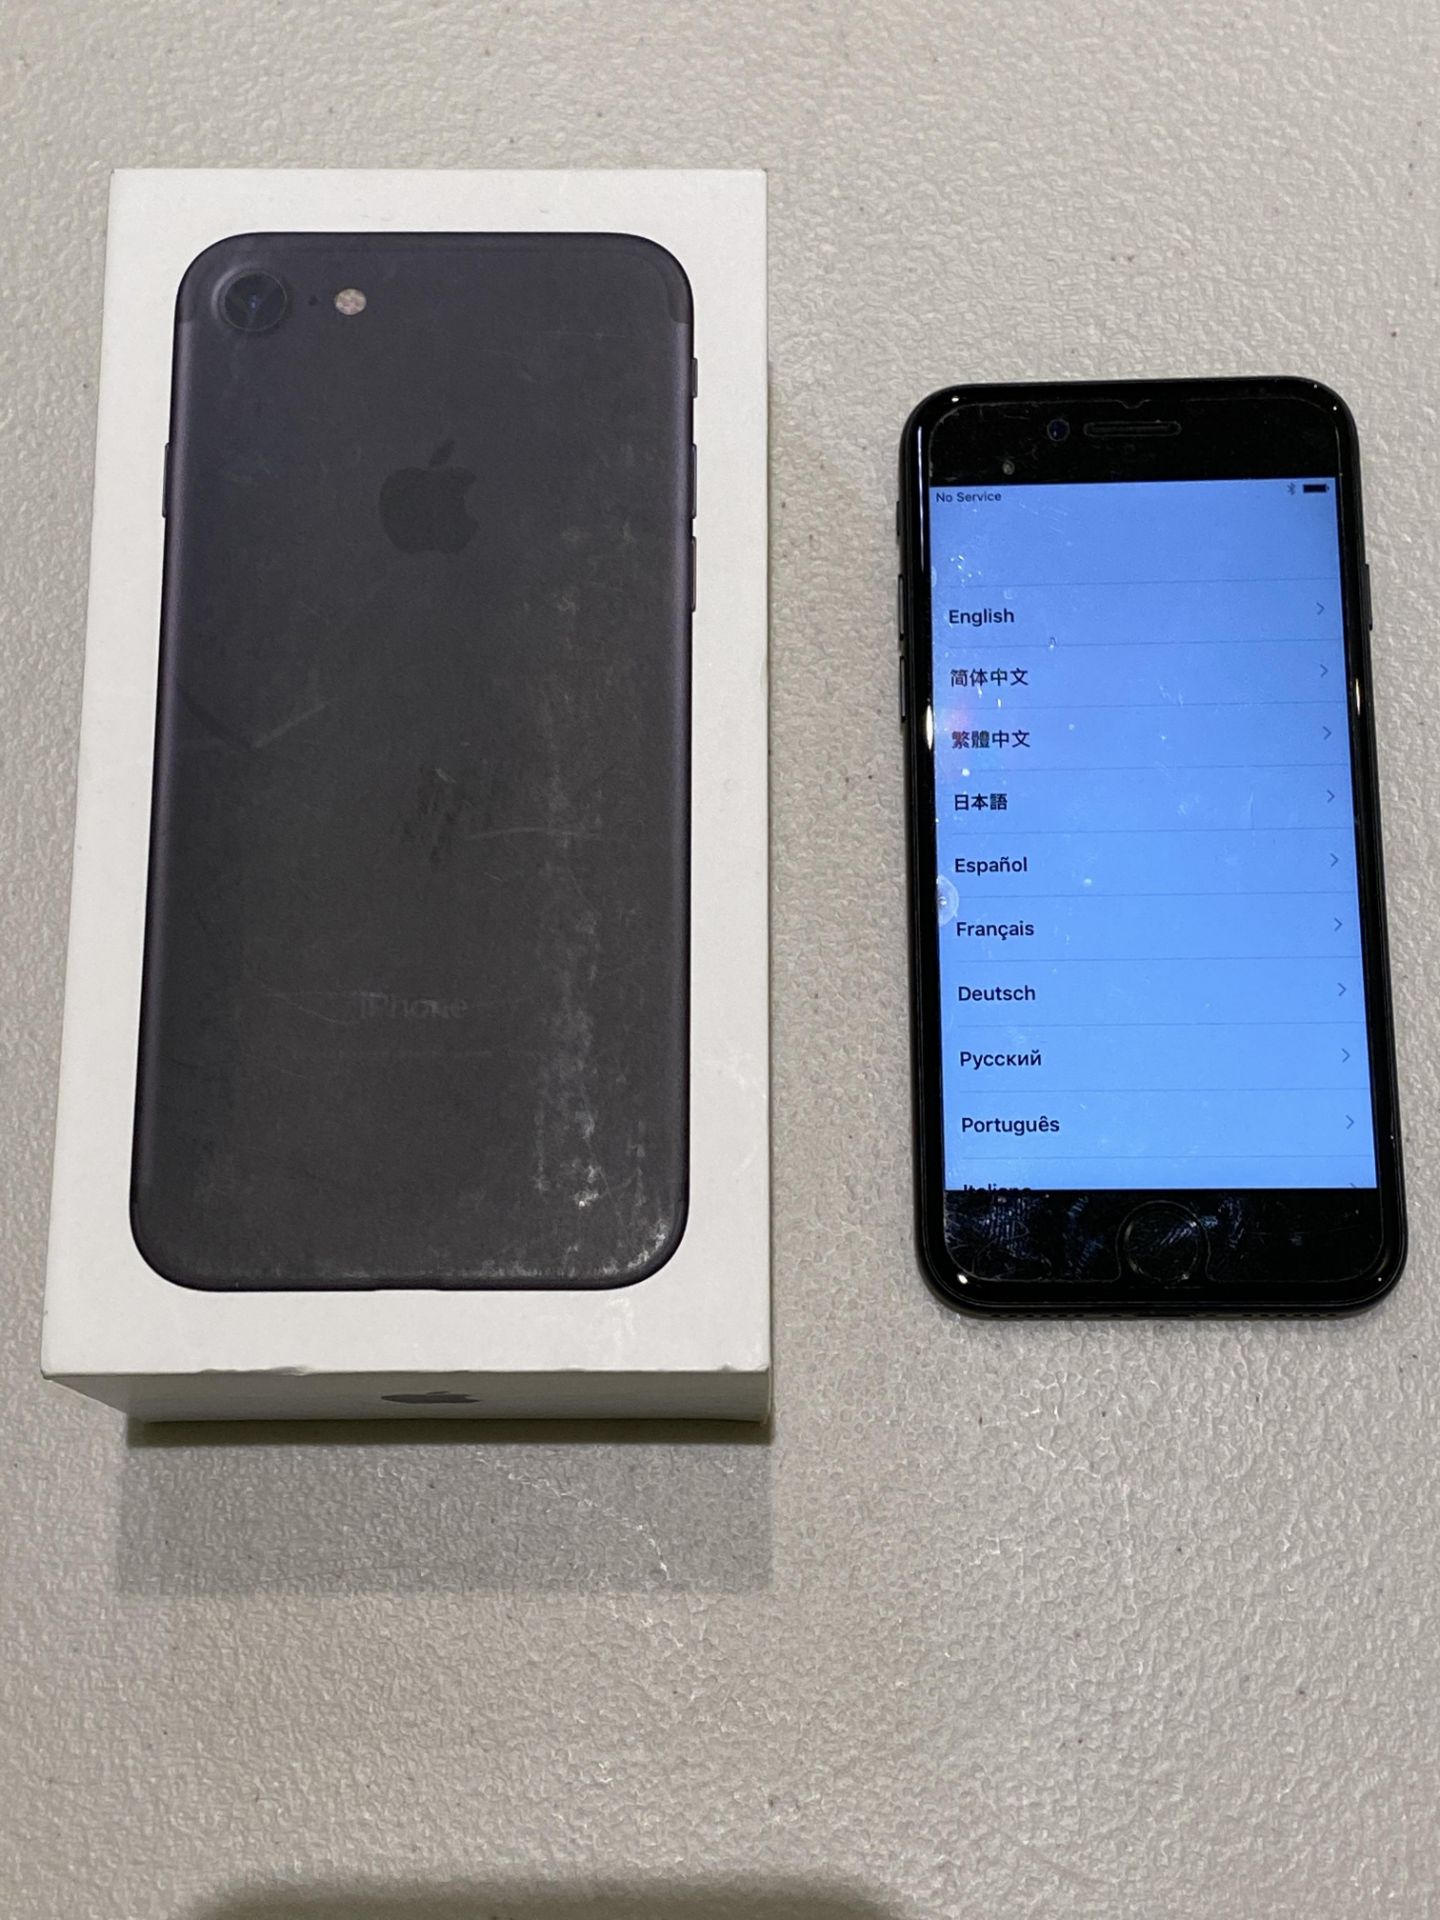 Apple Iphone 7 - 32 GB - Black, In Original Box with No Charger or Cables, Factory Reset, Ready for